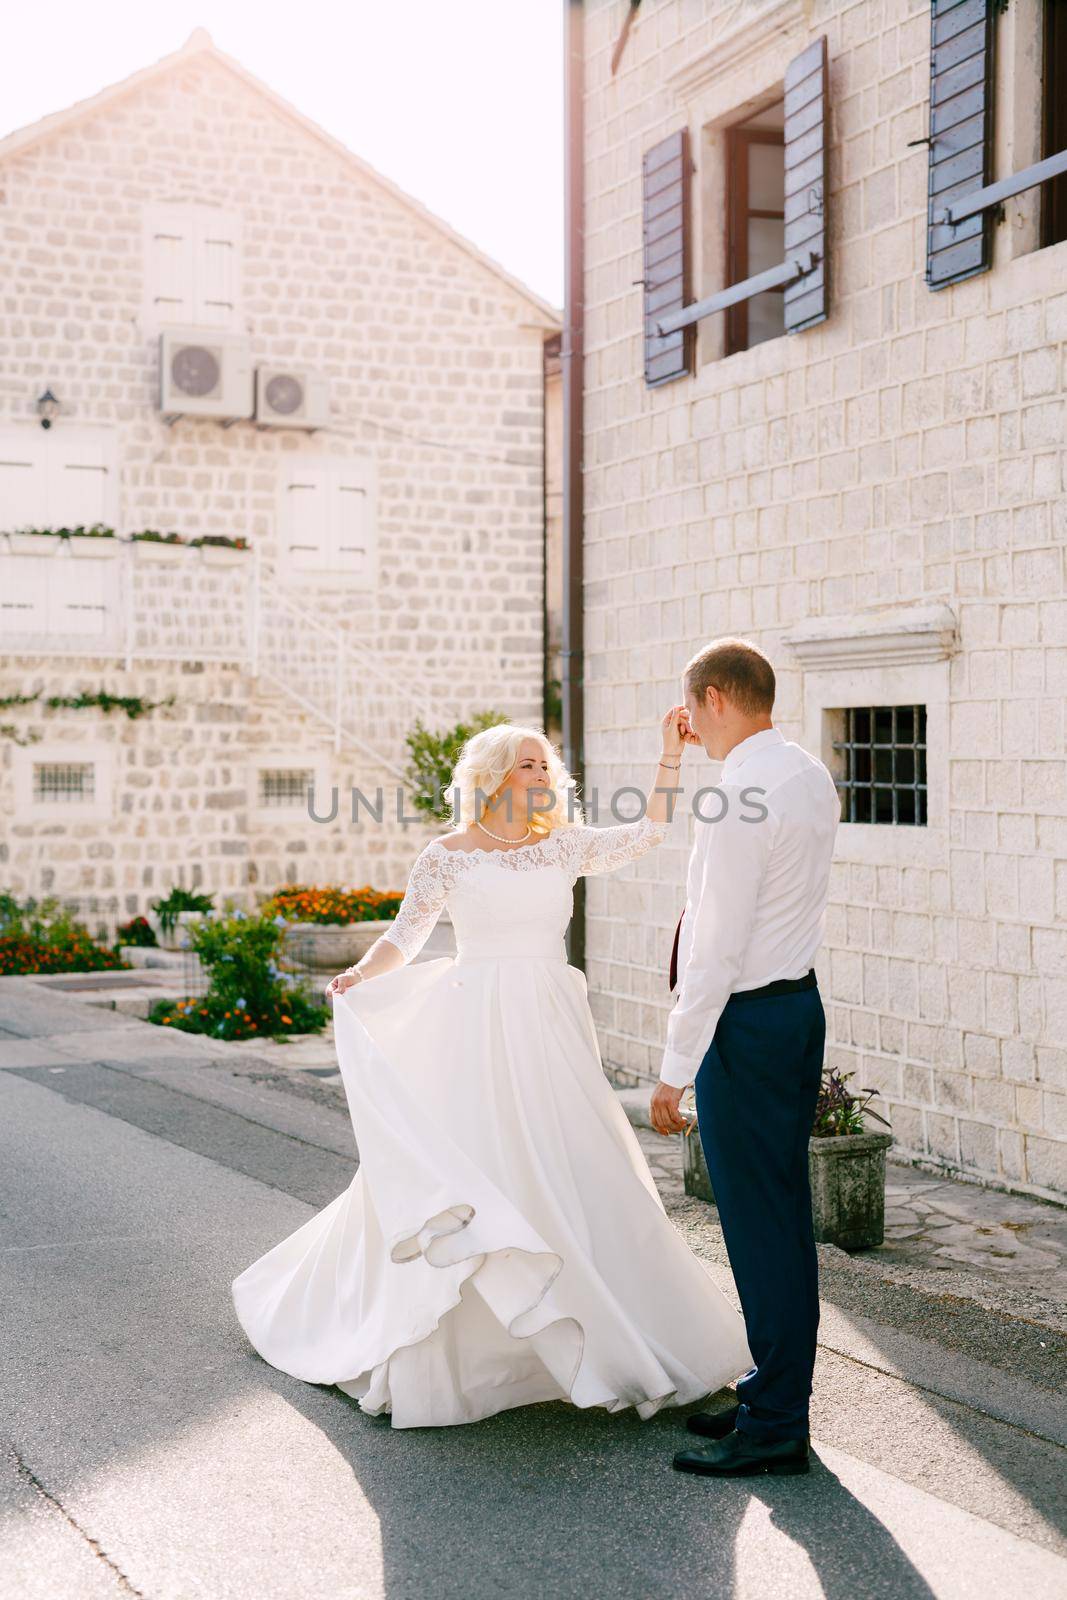 The bride and groom are dancing on the road near the beautiful white house in the old town of Perast . High quality photo